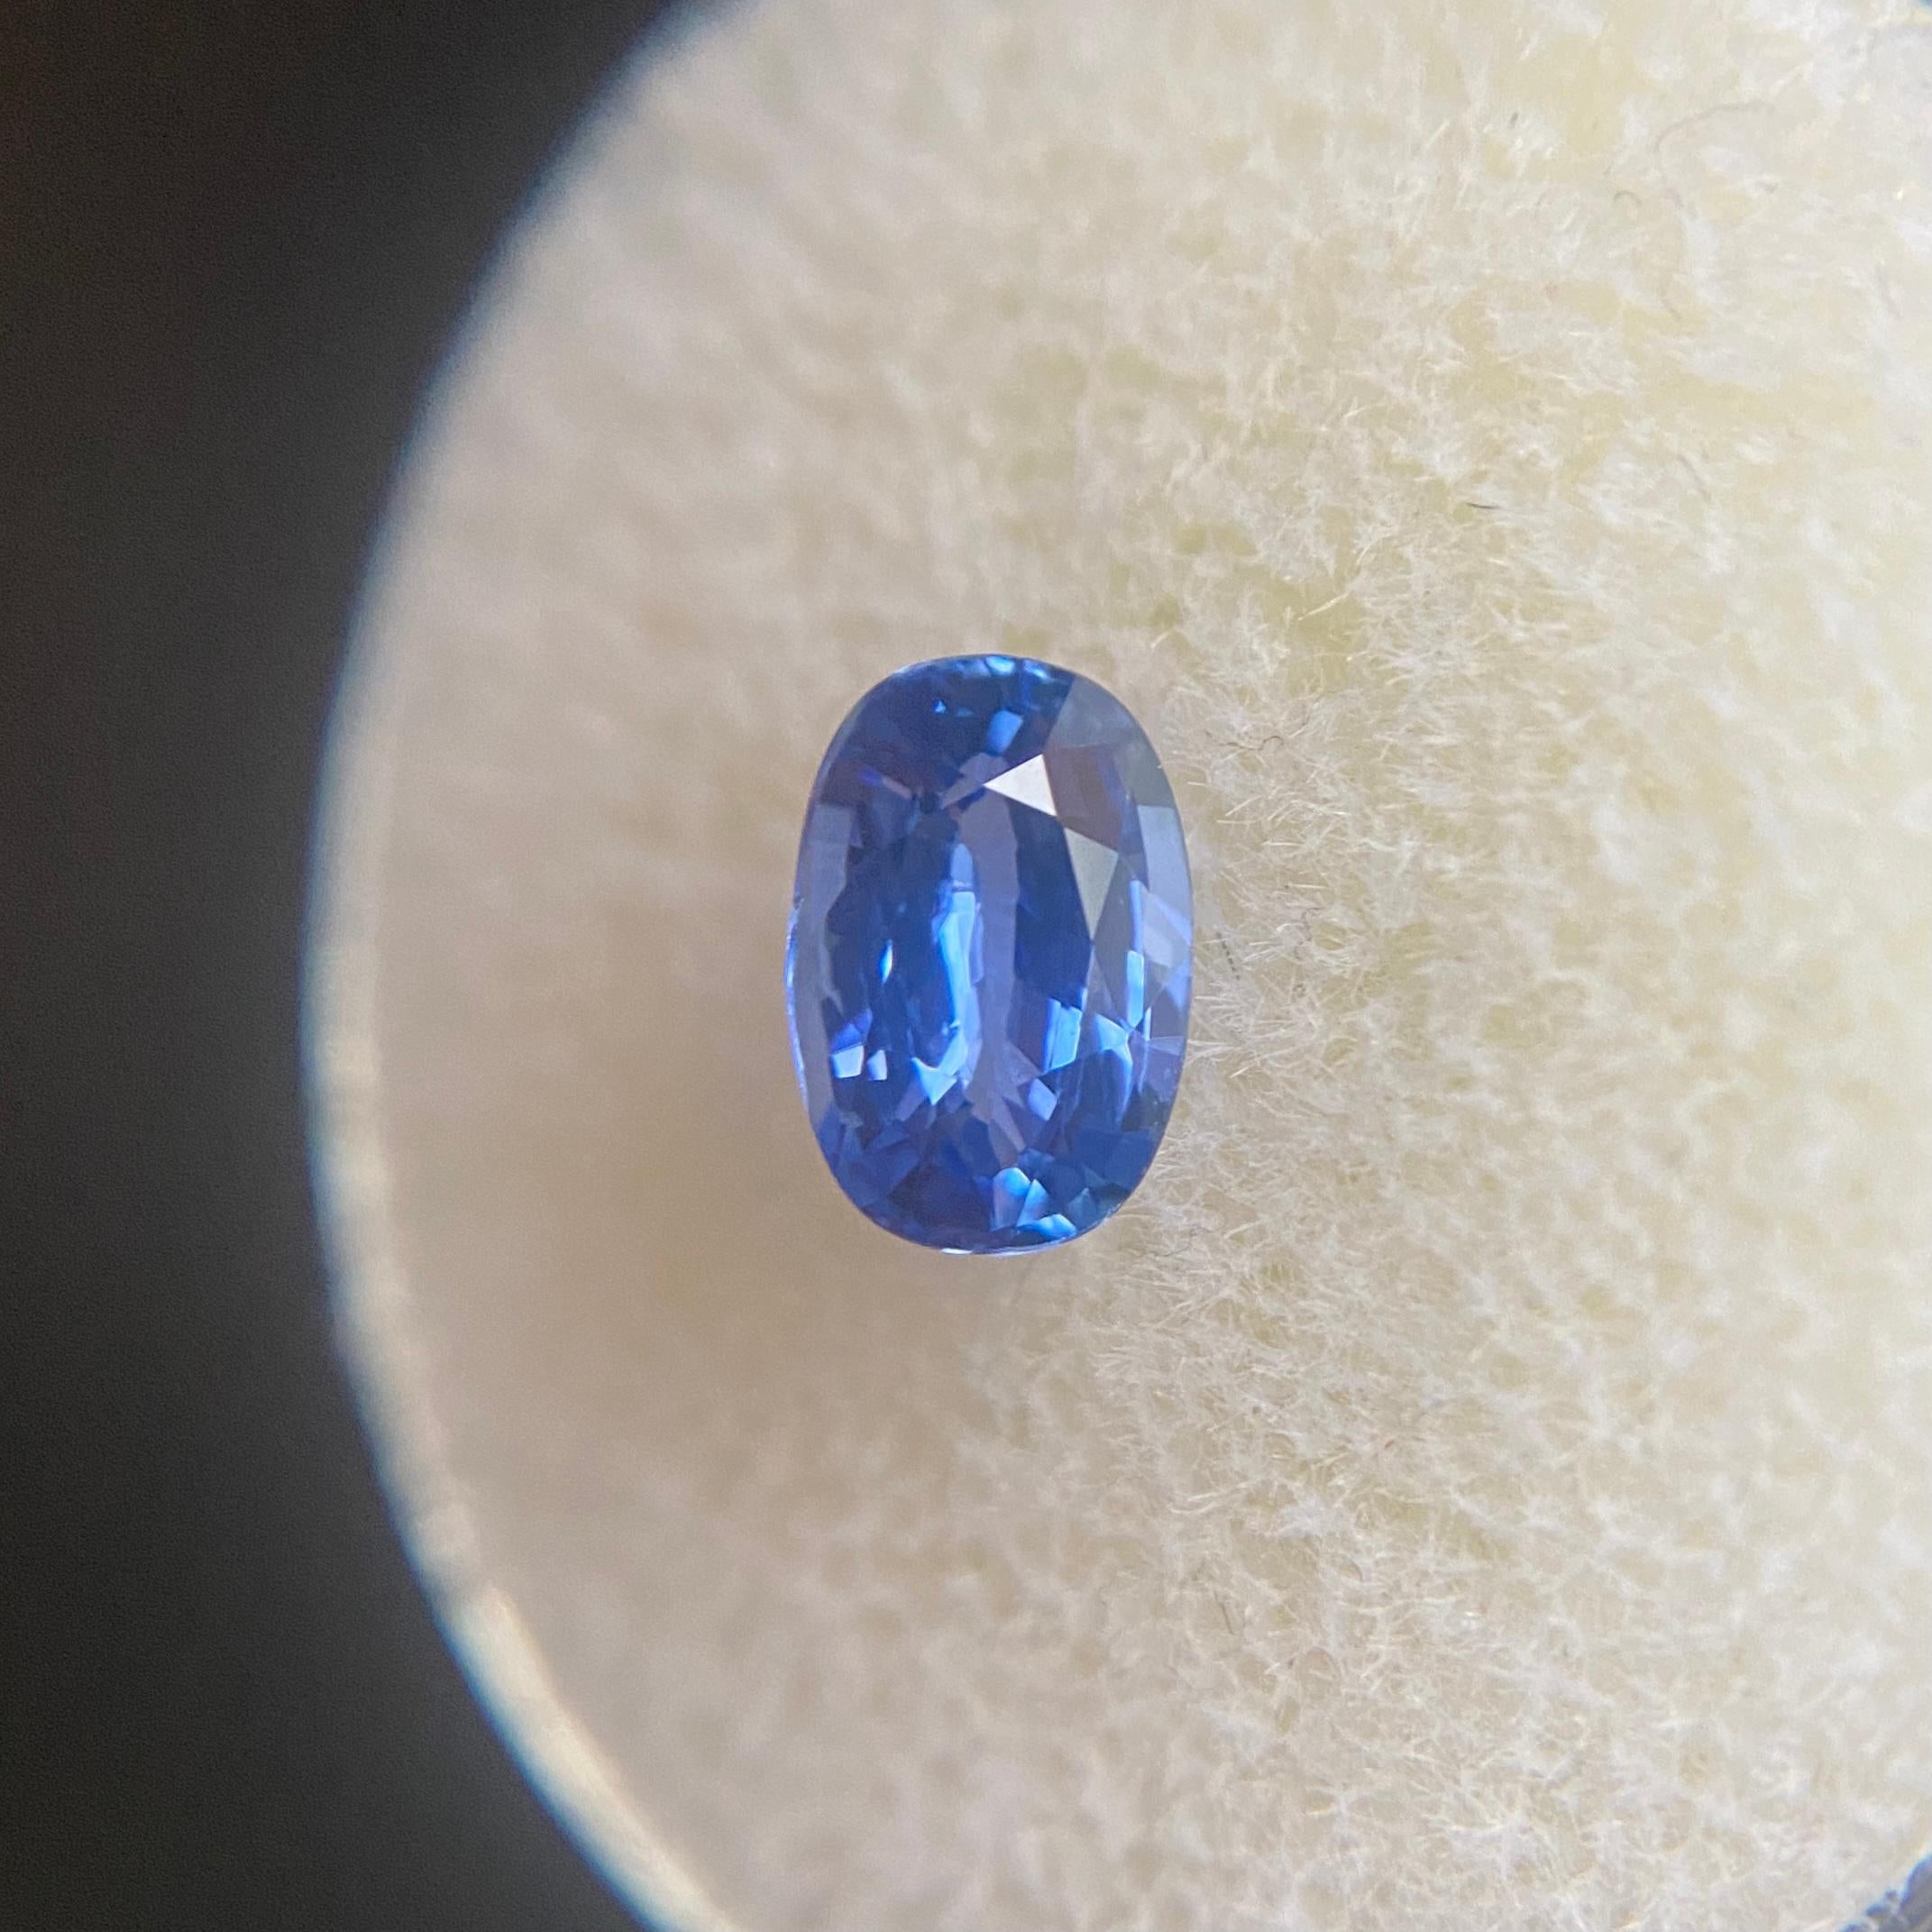 Fine Ceylon Blue Sapphire Gemstone.

1.06 Carat with beautiful vivid blue colour and excellent clarity, very clean stone with only some small natural inclusions visible when looking closely.

Also has a very good oval cut and ideal polish to show